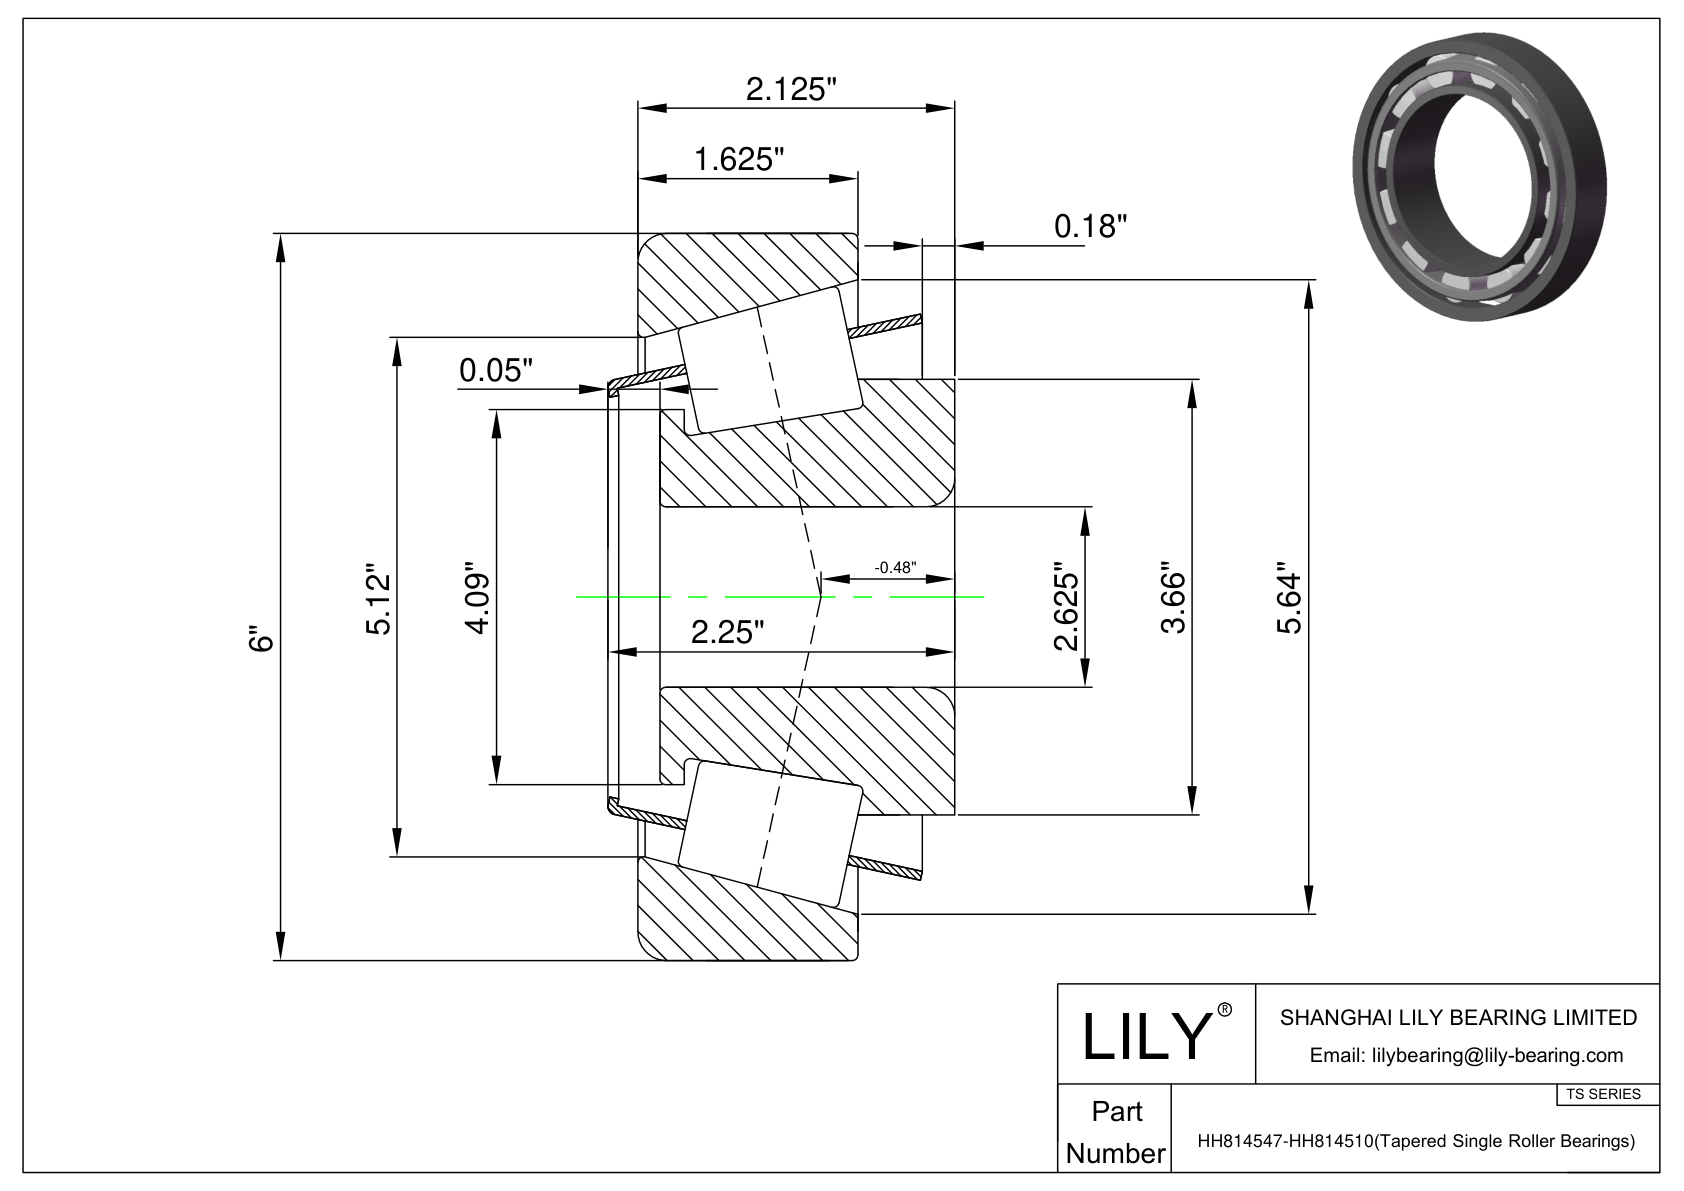 HH814547-HH814510 TS (Tapered Single Roller Bearings) (Imperial) cad drawing